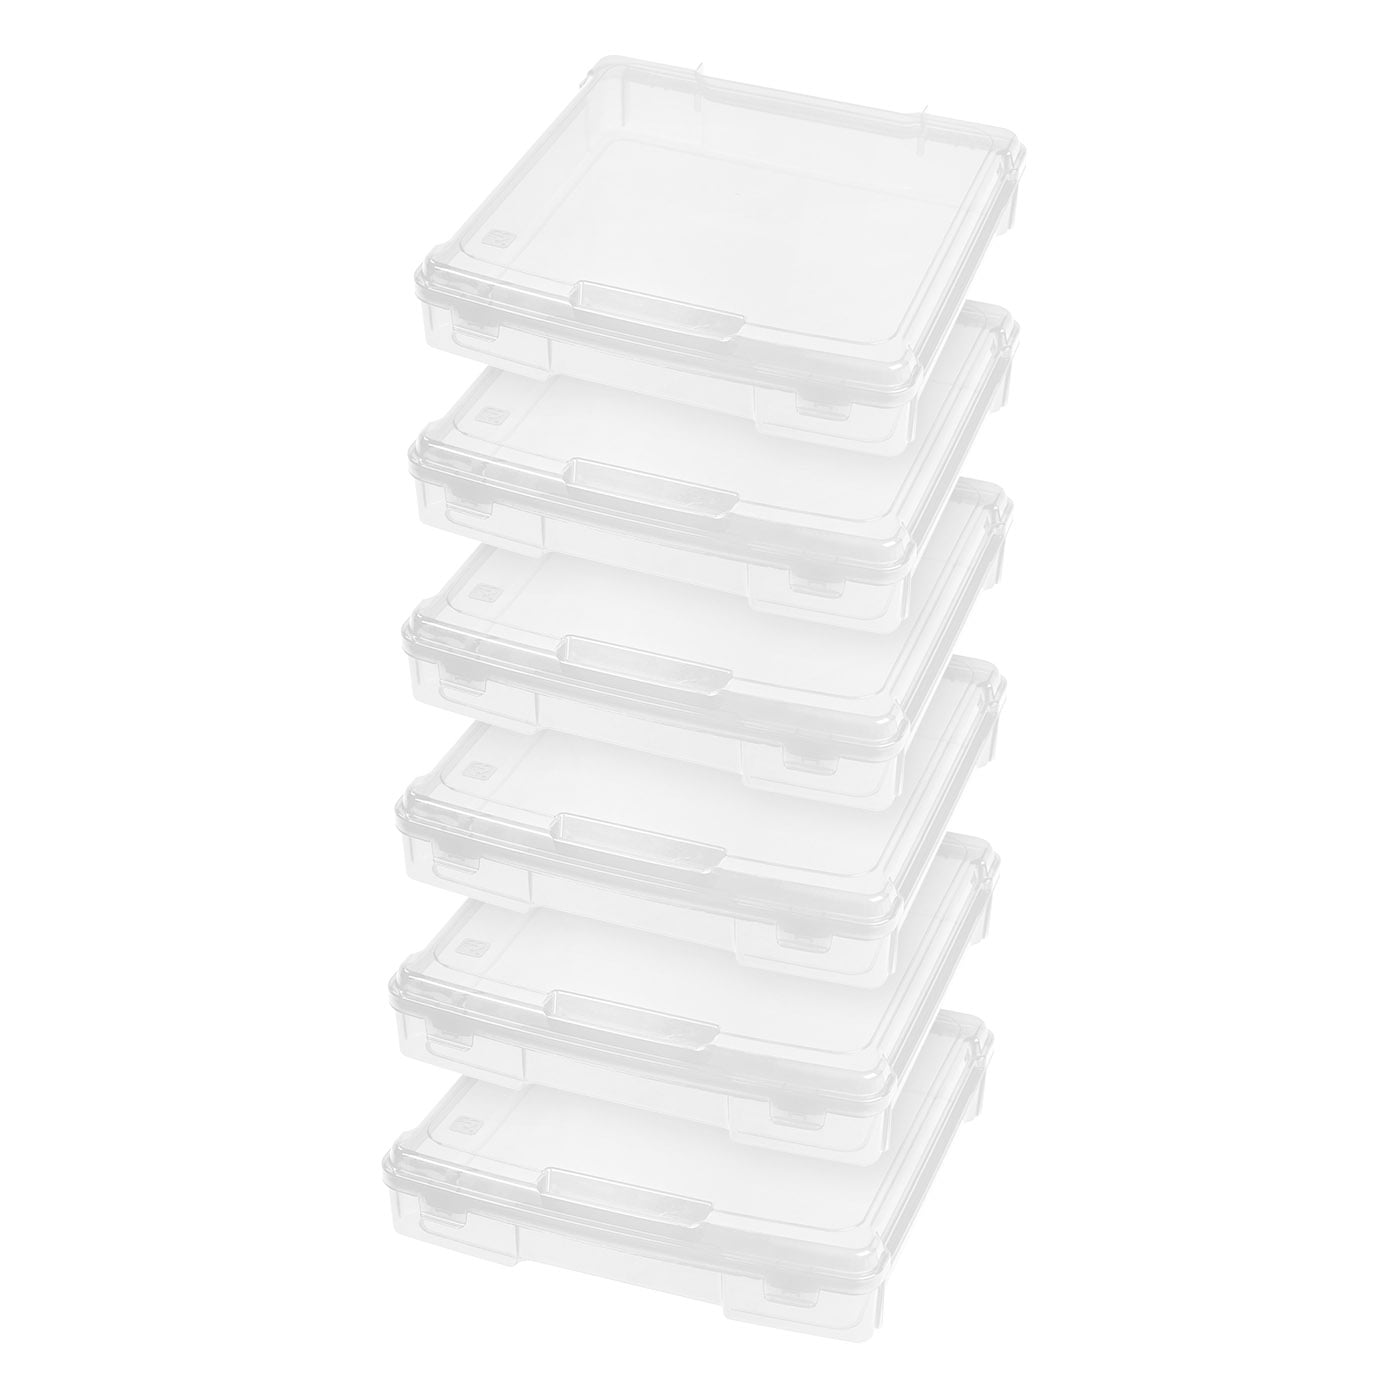 IRIS Portable Project Case for 12 x 12 - Set of 6, Clear 